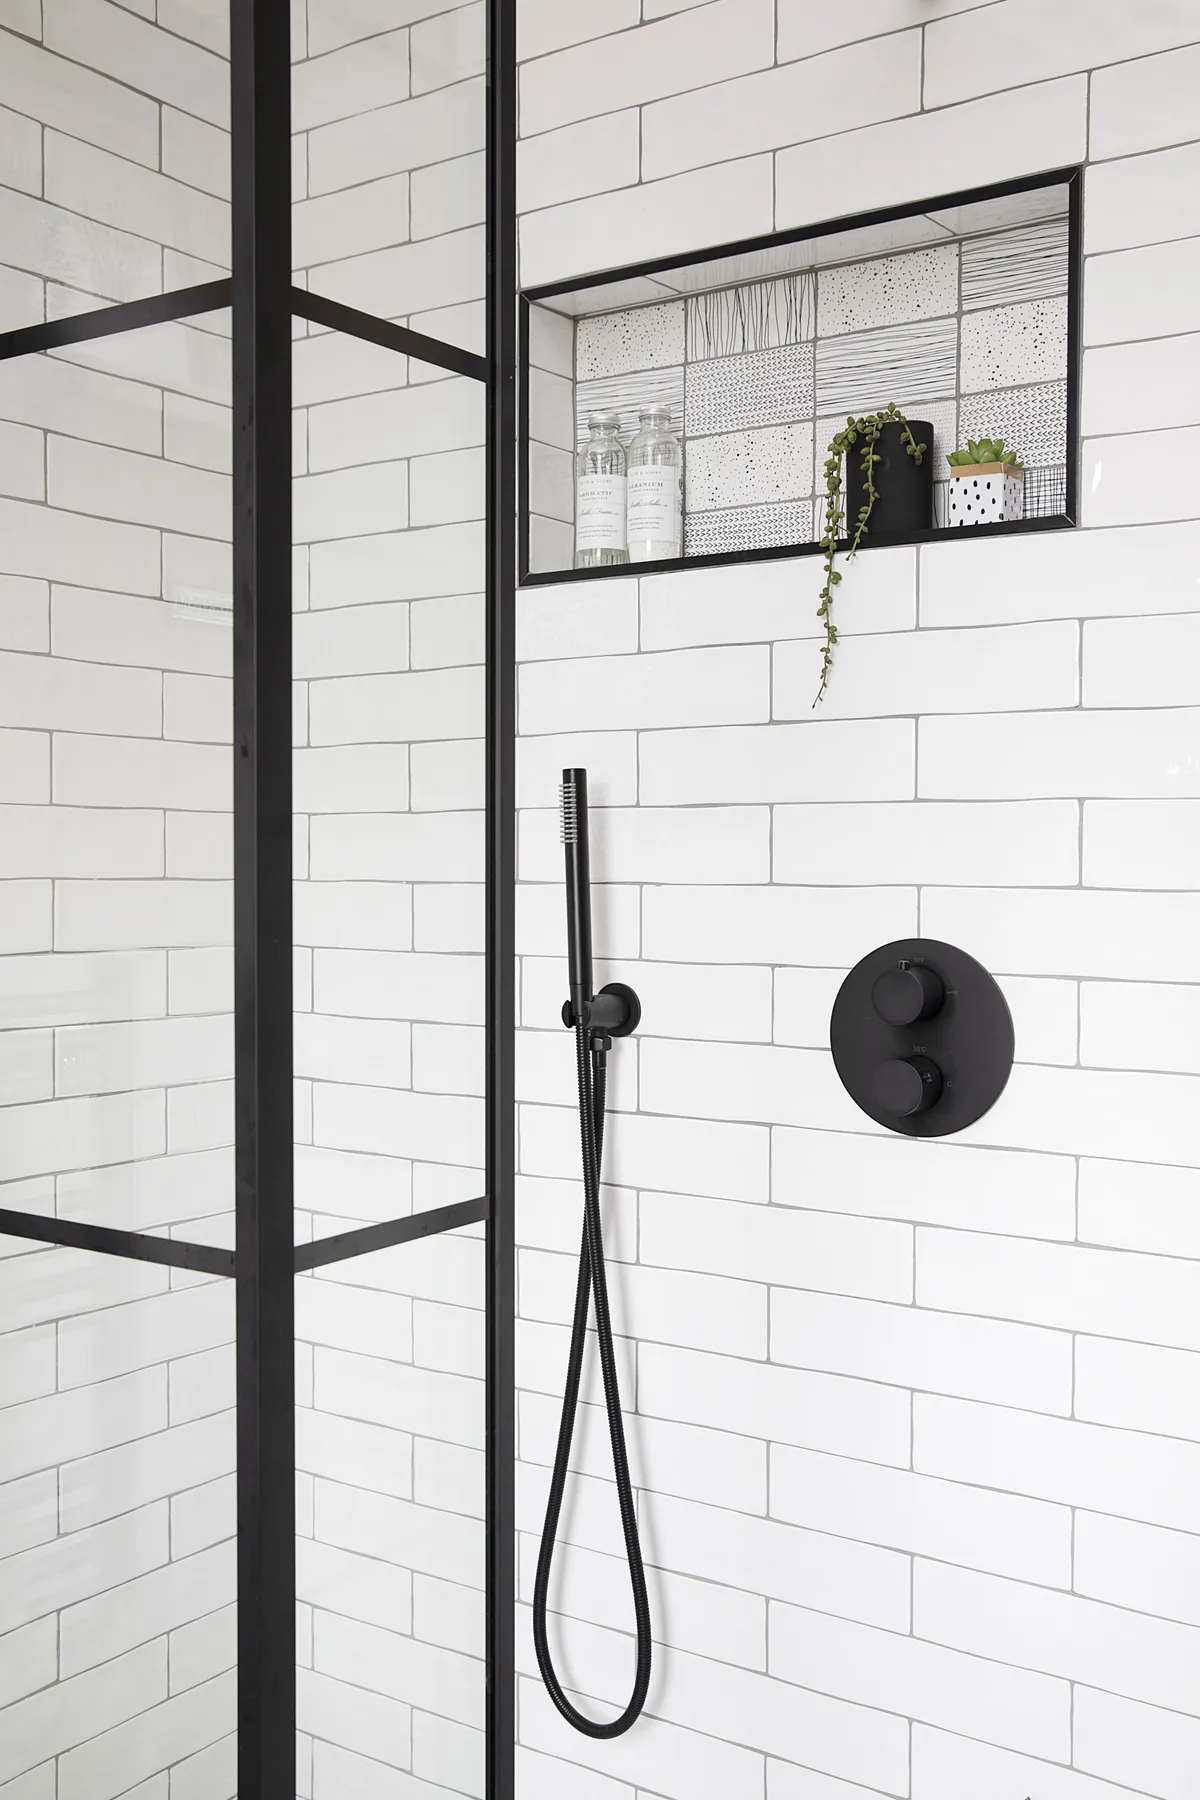 Quirky doodle motif tiles highlight the petite niche shelf, which is now Liz’s favourite part of the bathroom